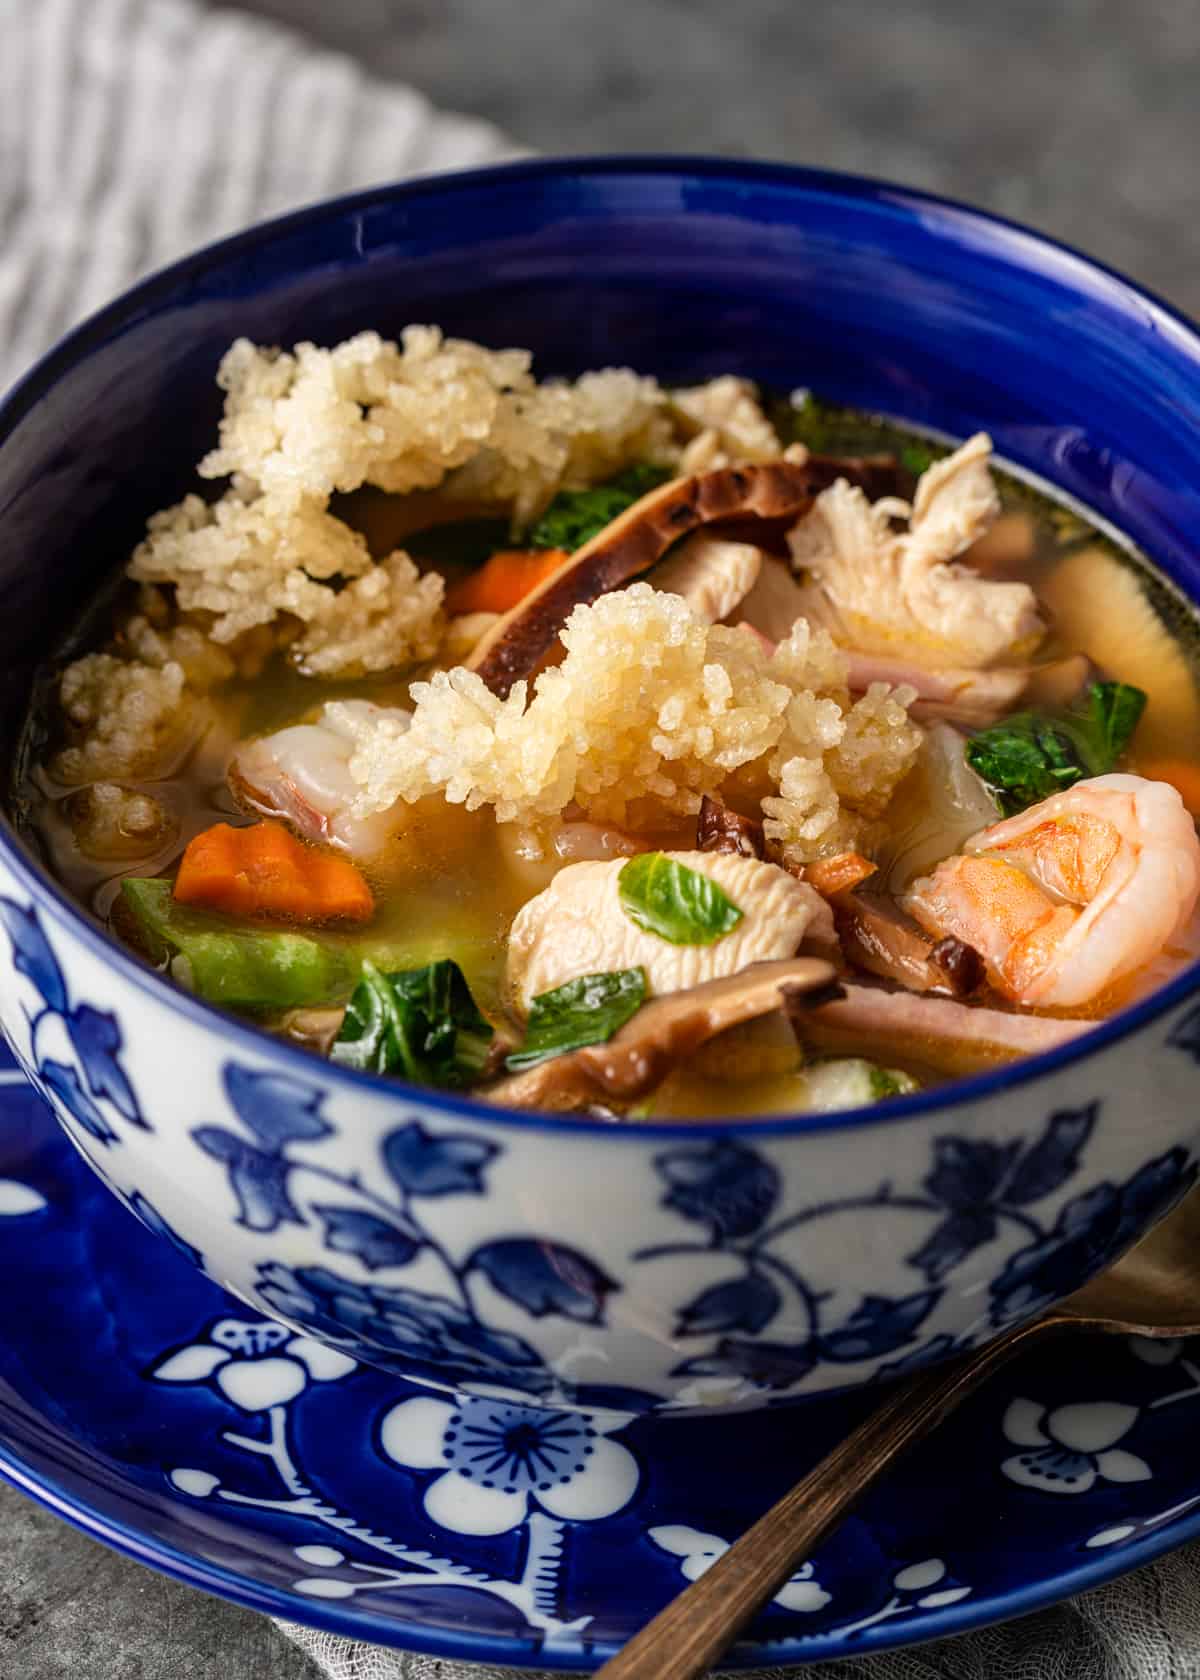 Sizzling Rice Soup with mushrooms, shrimp and other ingredients